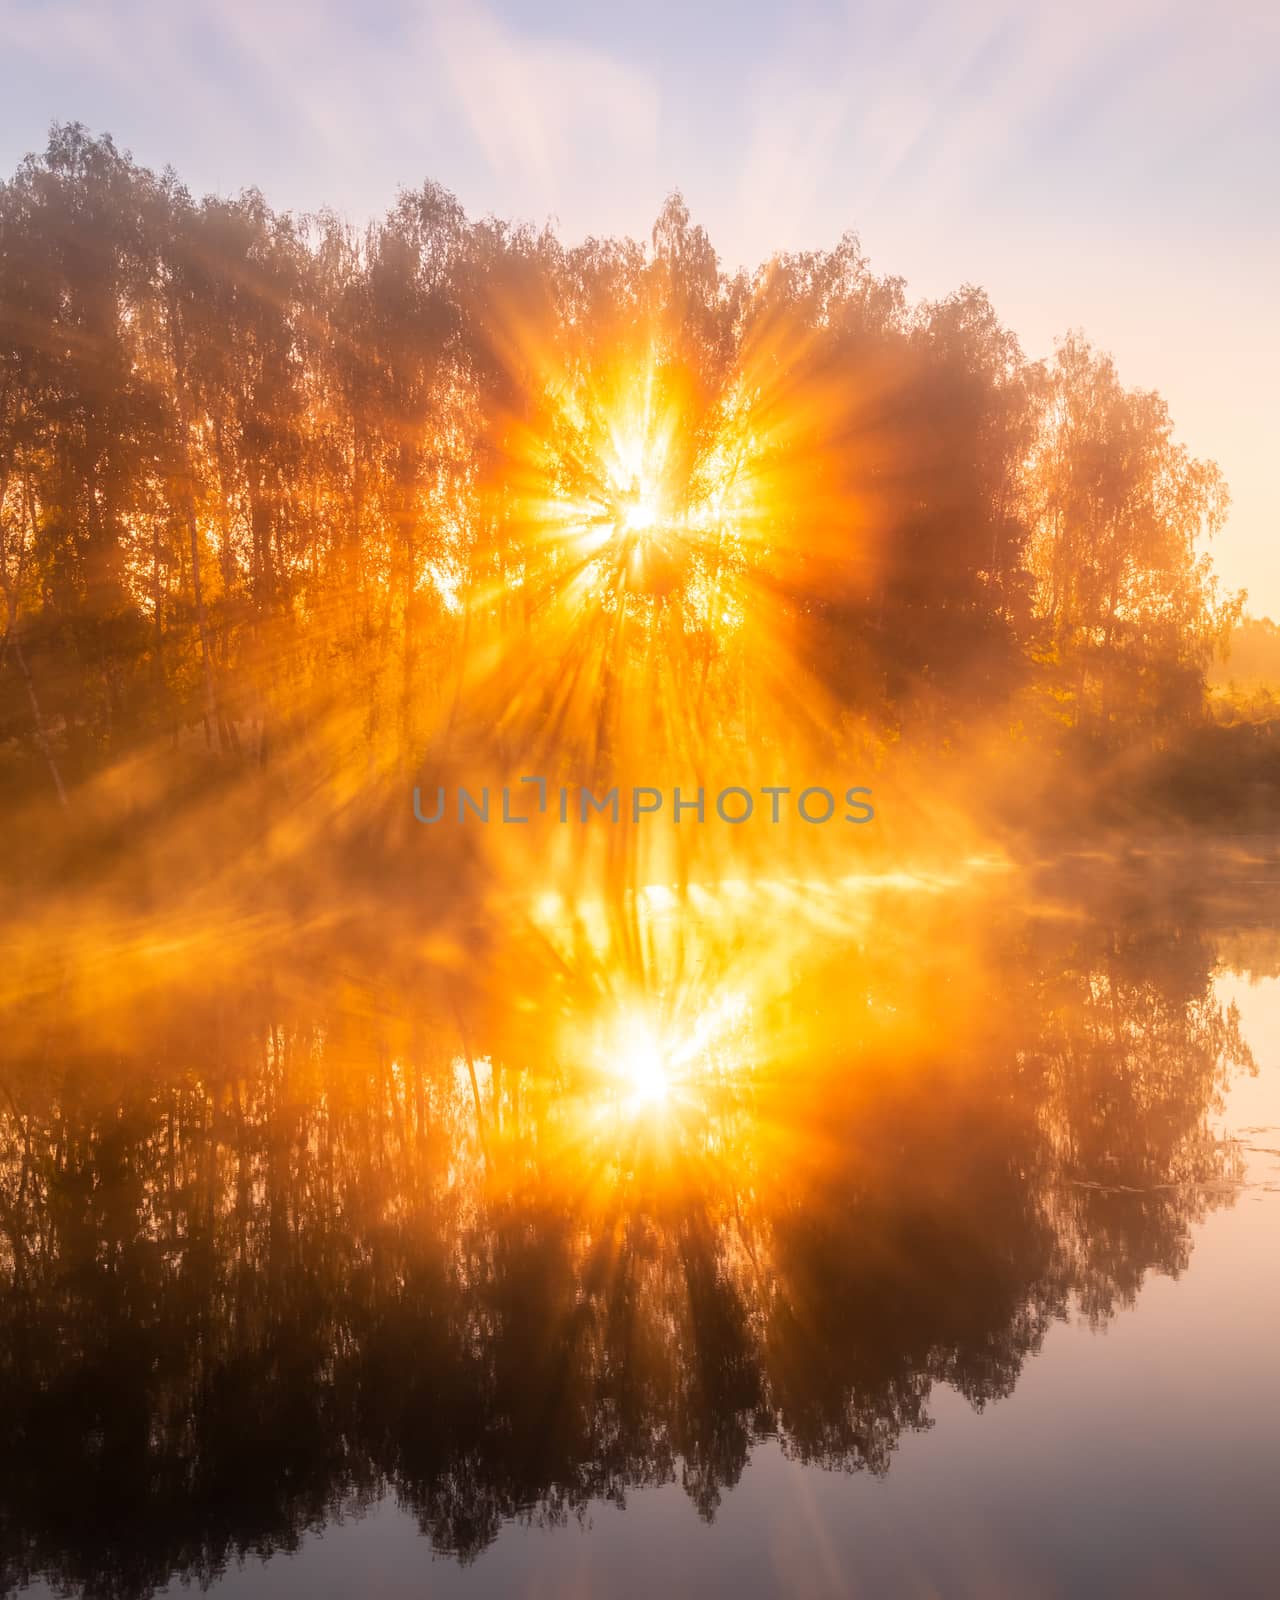 Golden misty sunrise on the pond in the autumn morning. Trees with rays of the sun cutting through the branches, reflected in the water.